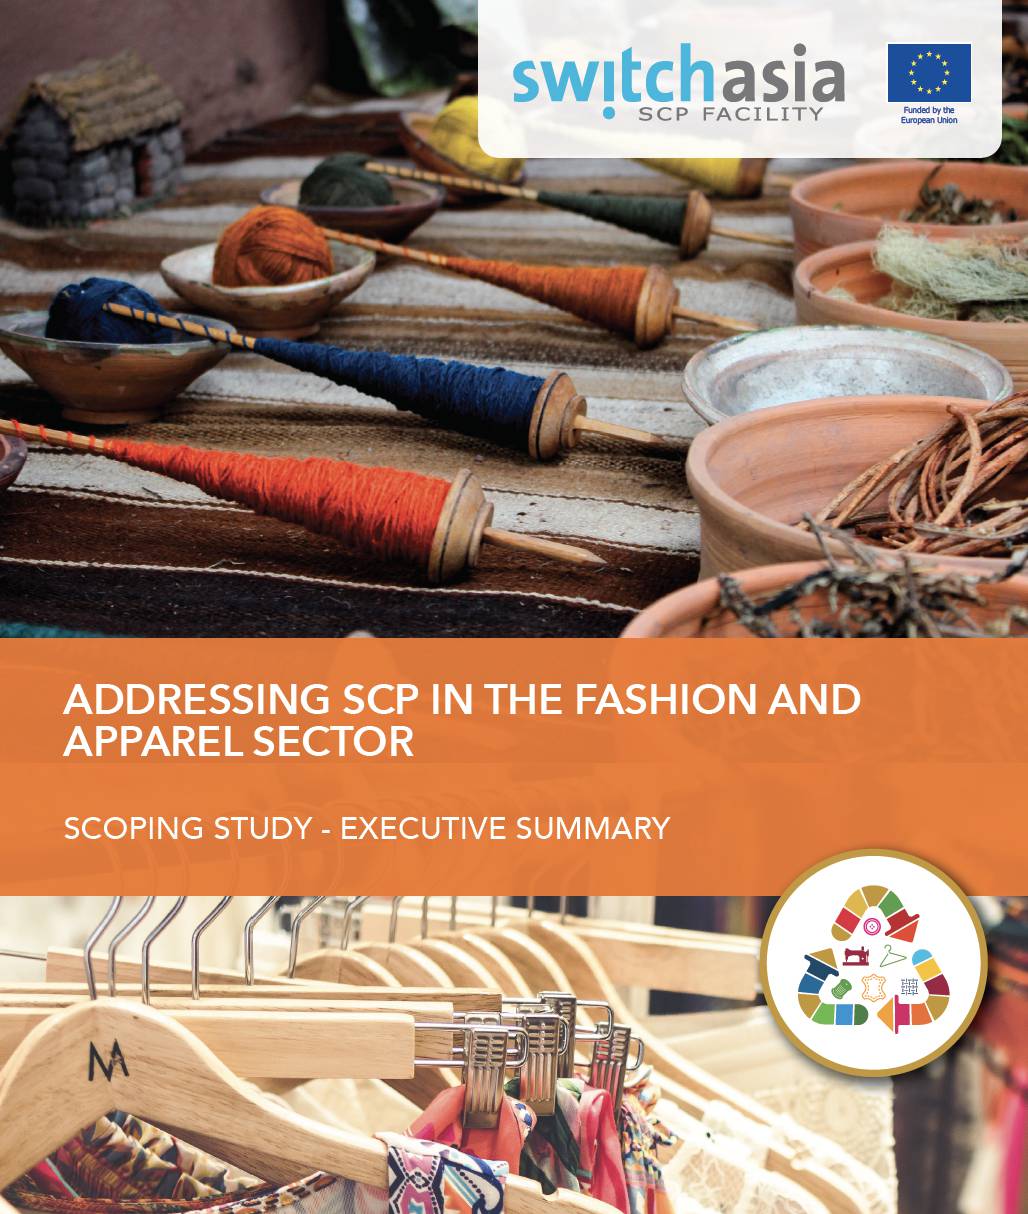 Addressing SCP in the Fashion and Apparel Sector